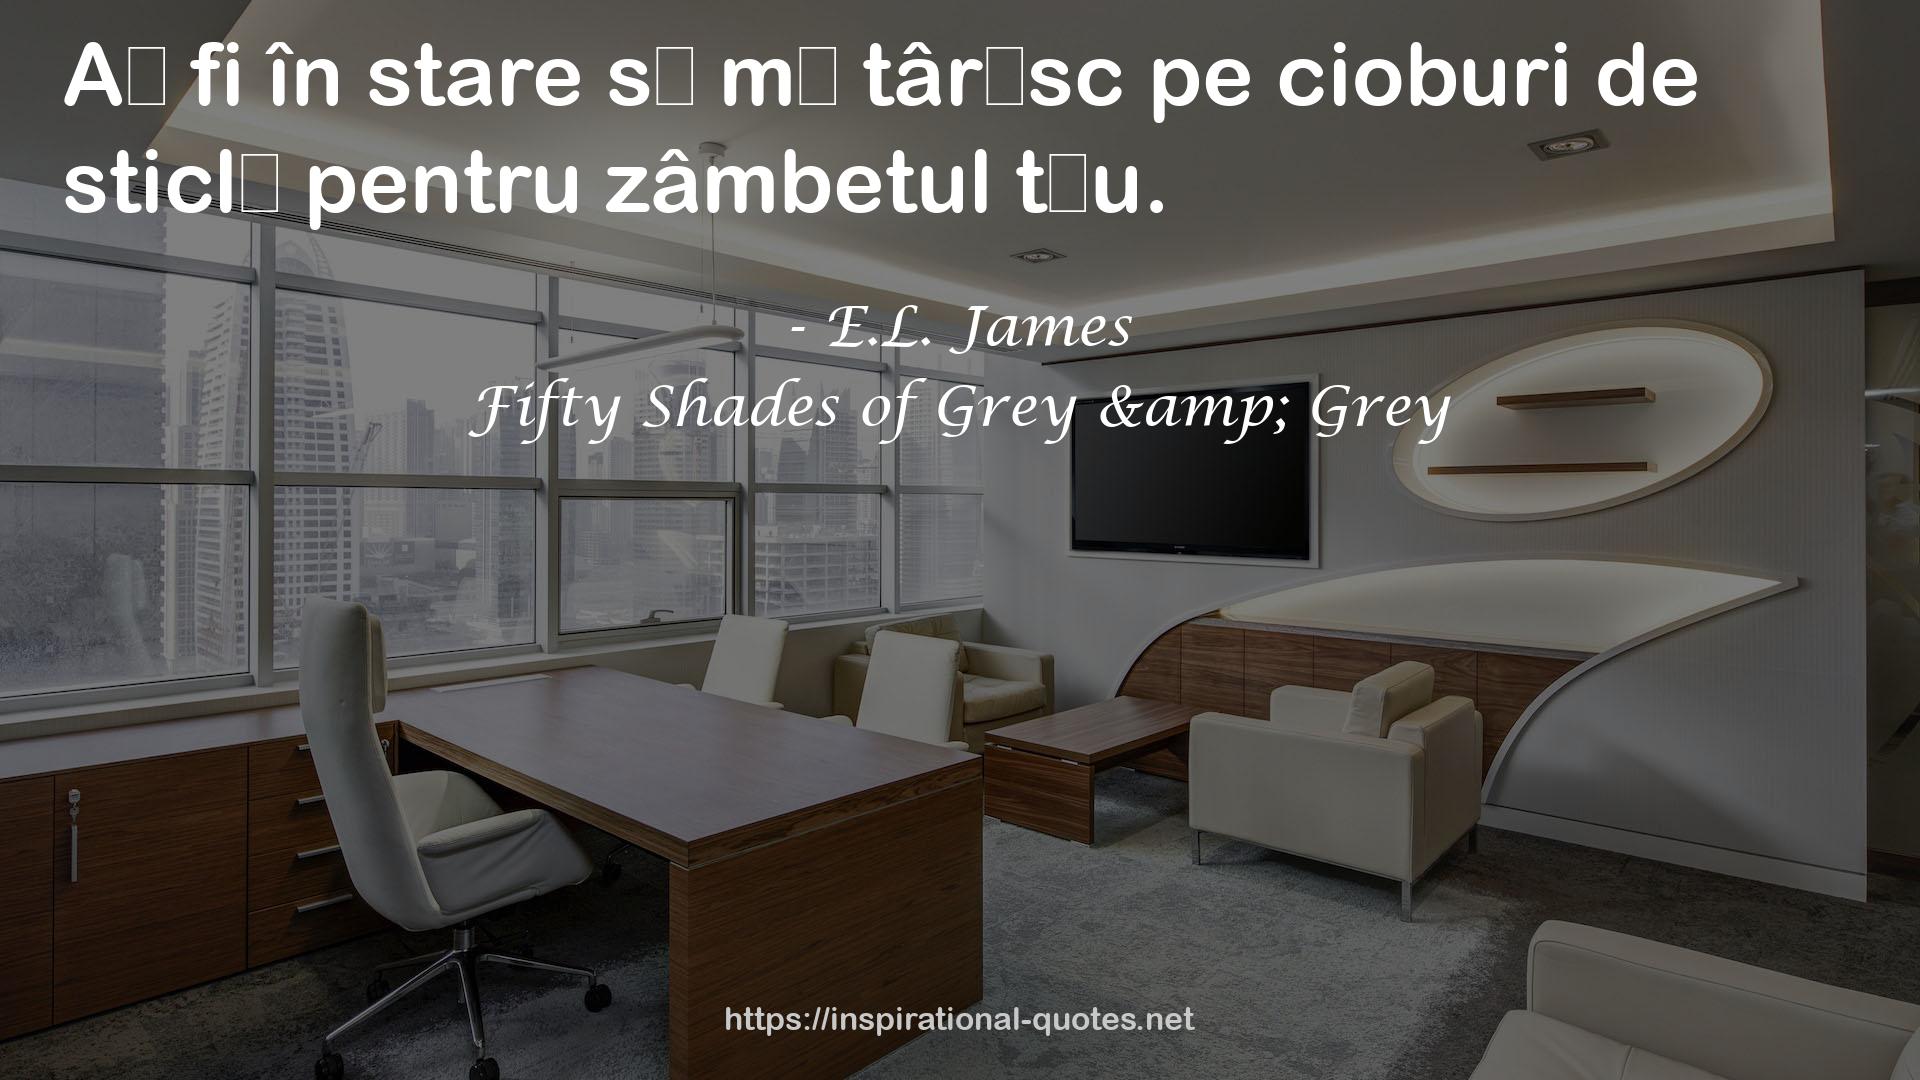 Fifty Shades of Grey & Grey QUOTES